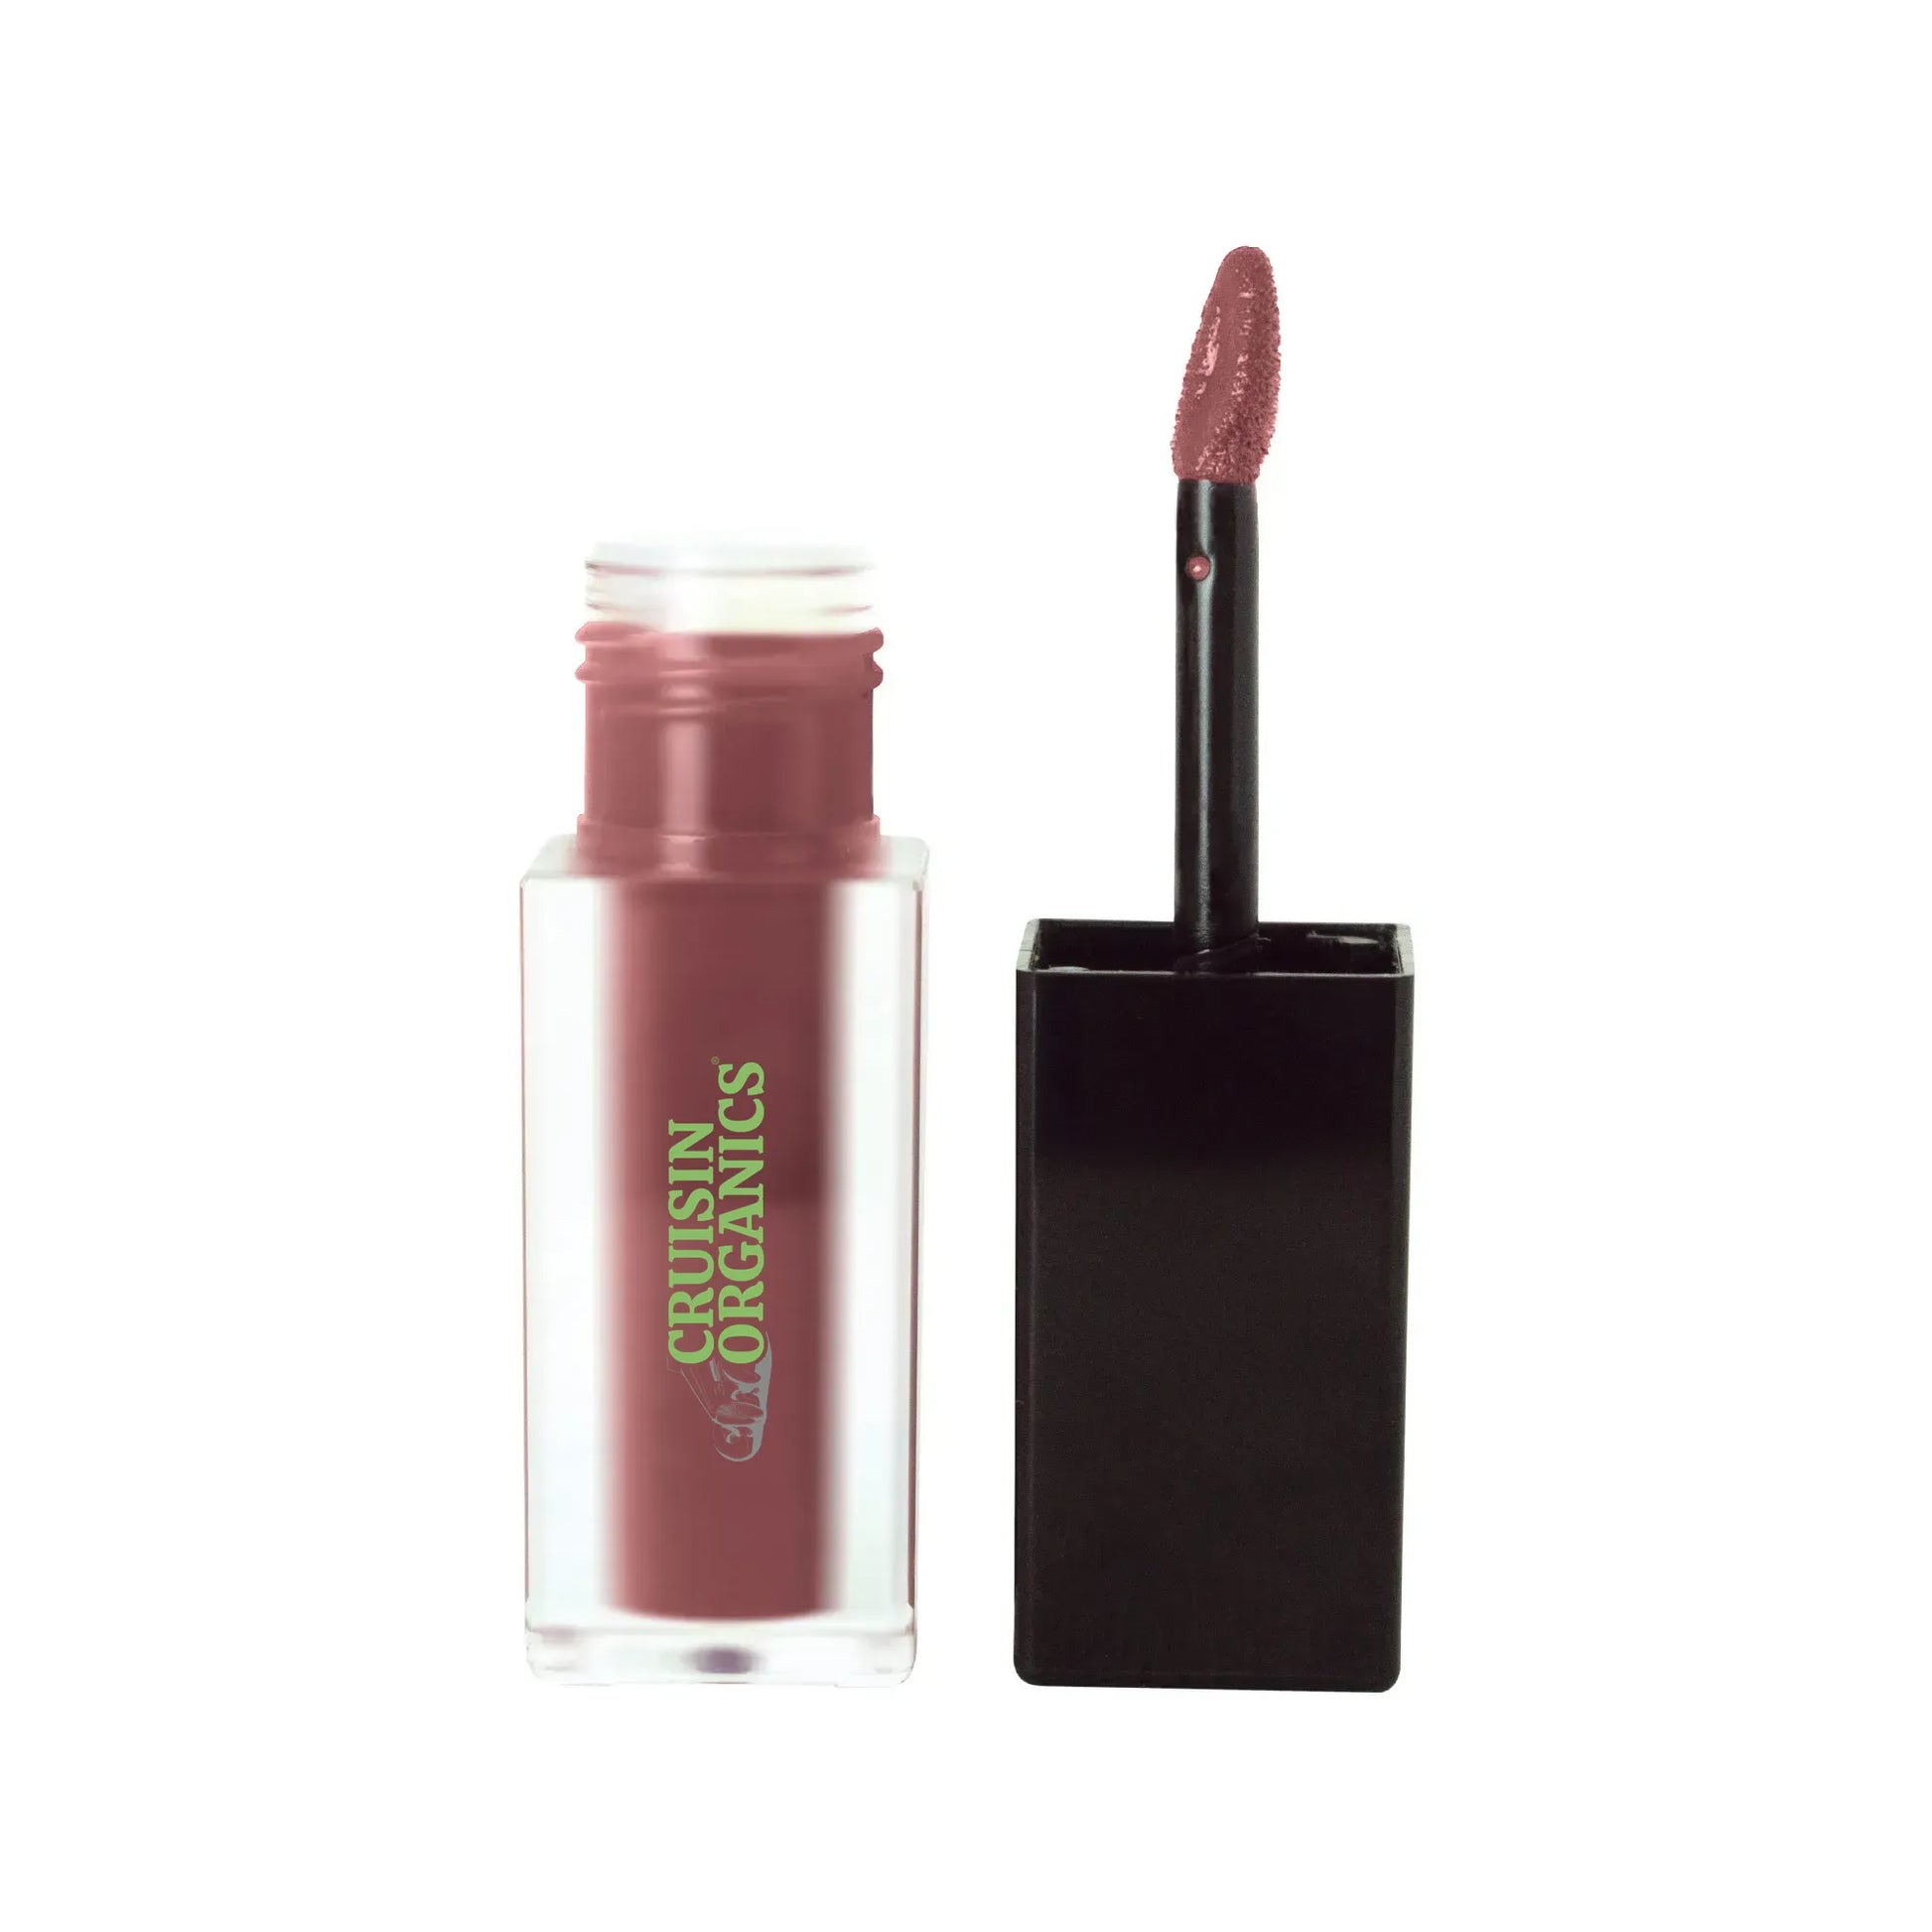 Cruisin Organics Blackberry Wine Matte Lip Stain. Organically smoozin noooo-fuss. Our formula ensures the high impact along with the high-density color every woman wants. Our lip stain has a doe-shaped, precision application for silky refining as a velvety matte finish. Packed with lip blackberry wine color and softness from vitamin E.